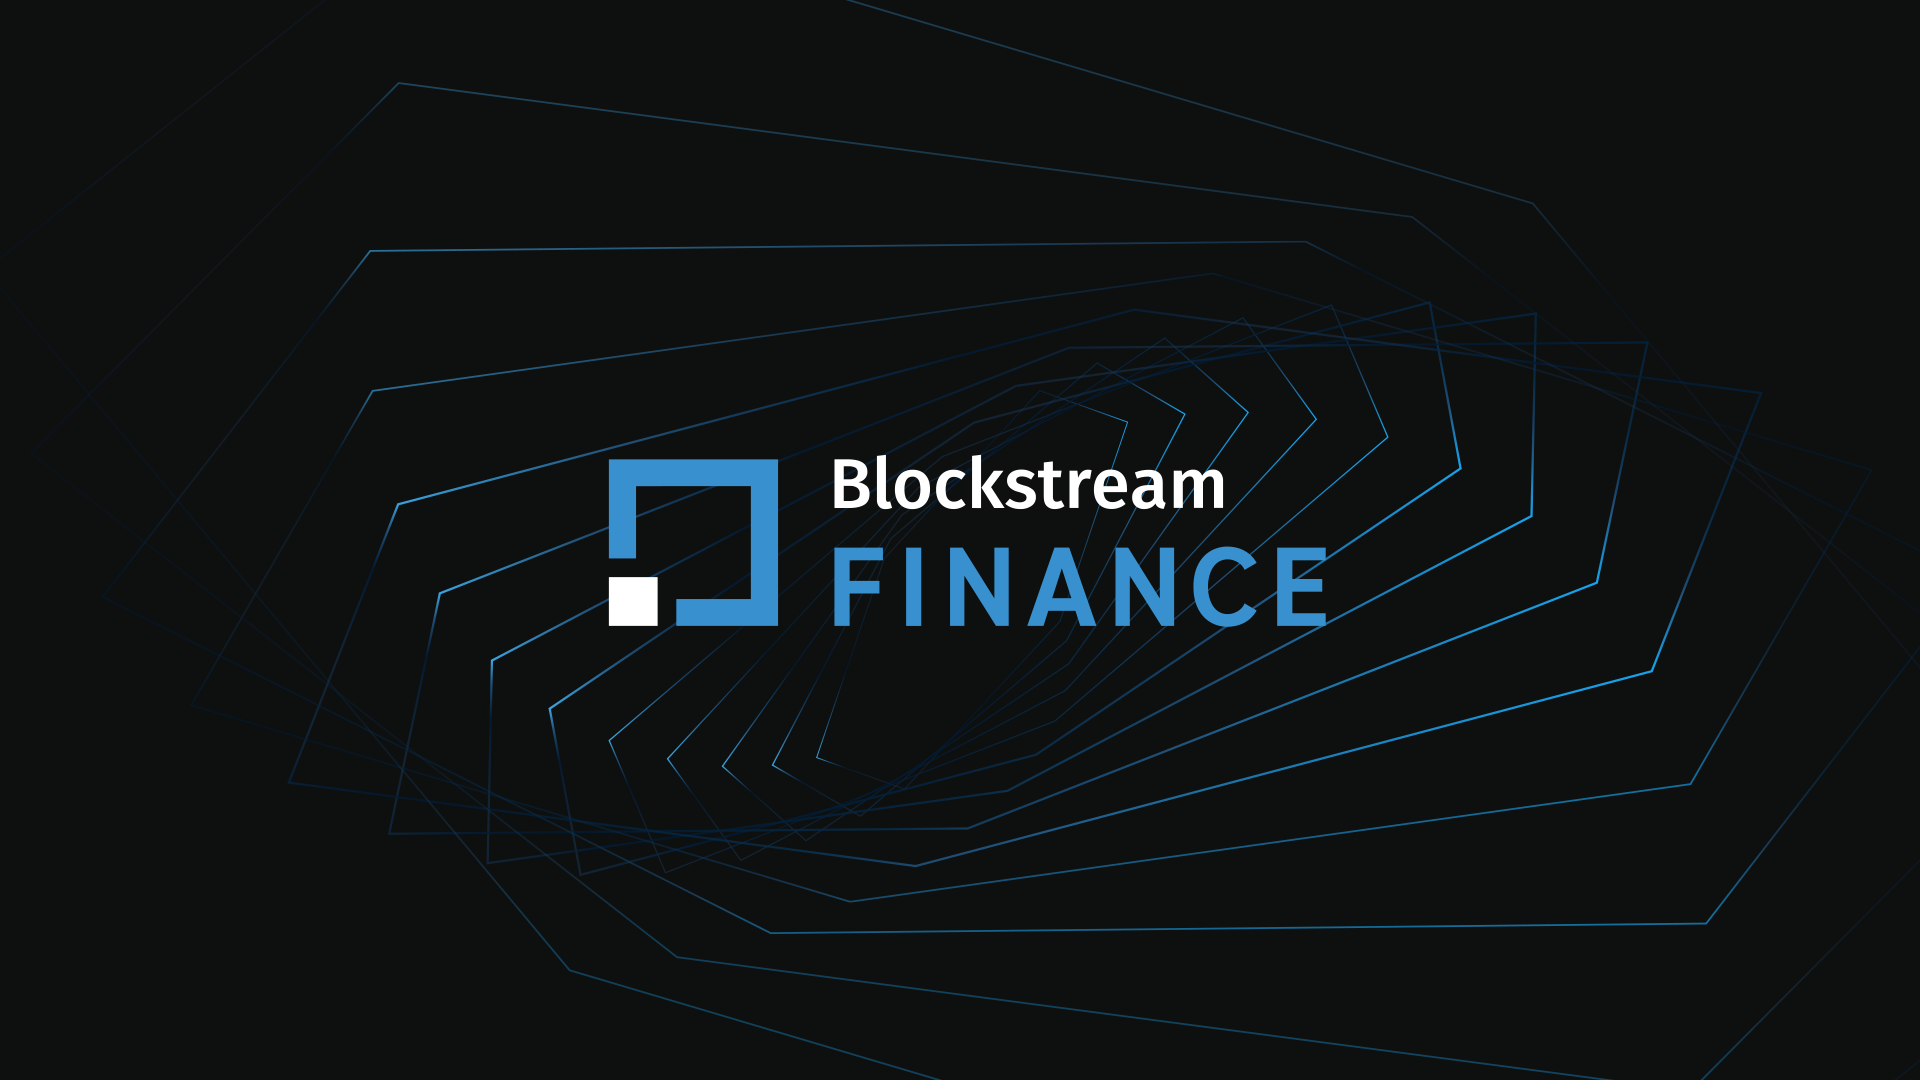 Blockstream Responds to Demand for BASIC Note with Series 2 Launch Aimed at Non-US Investors